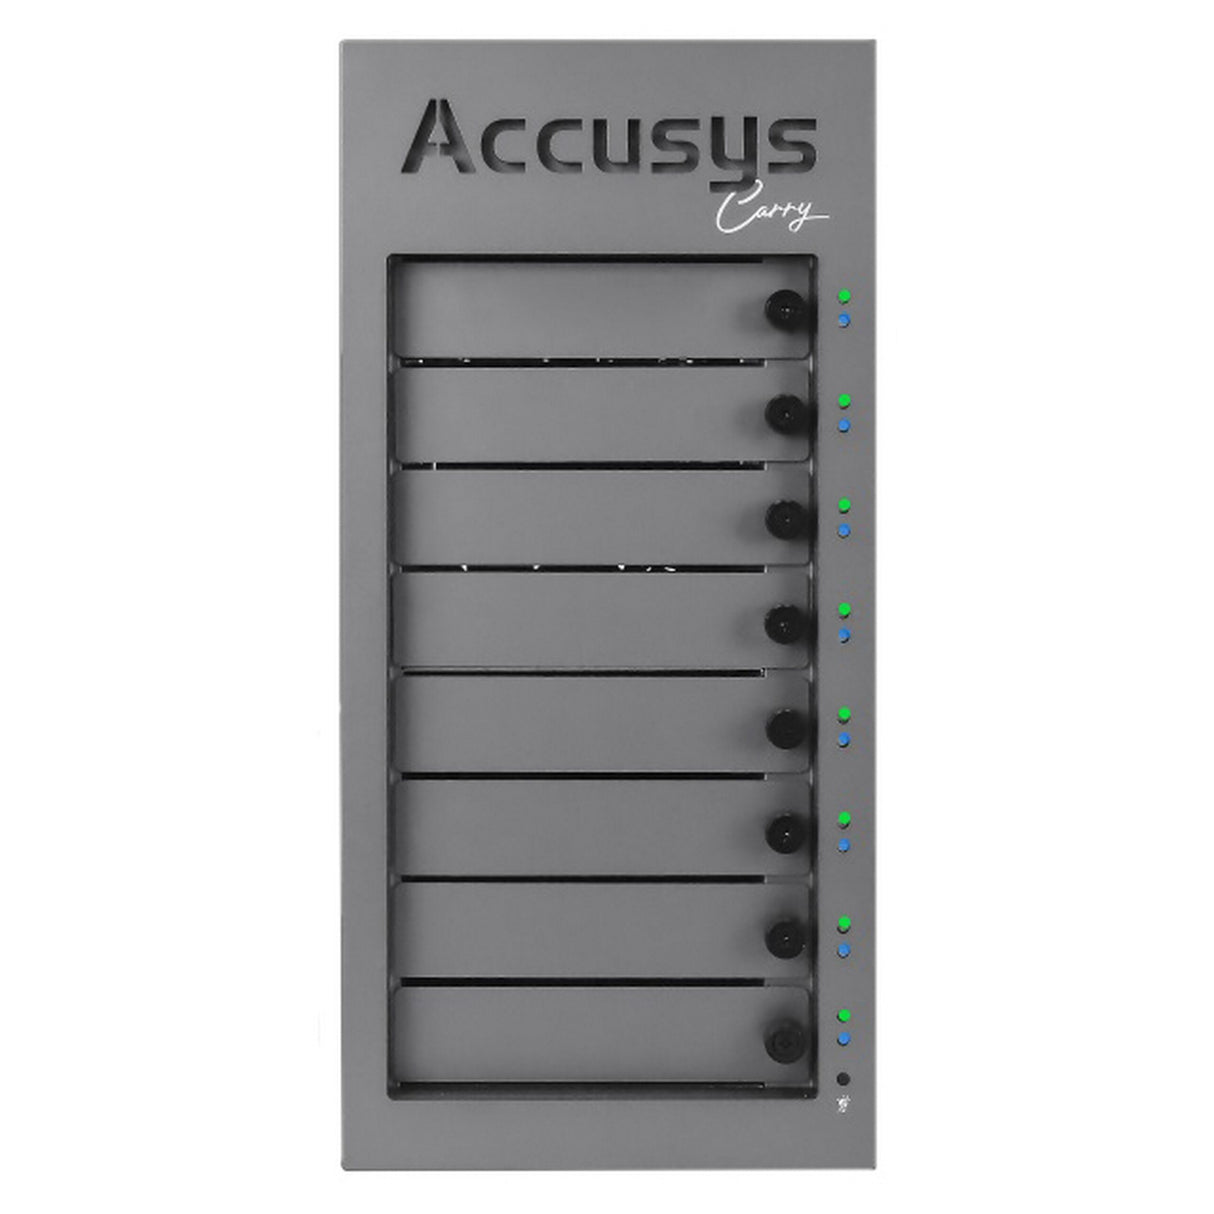 Accusys Gamma Carry Portable Thunderbolt 3 Storage Designed for DIT and Post-production